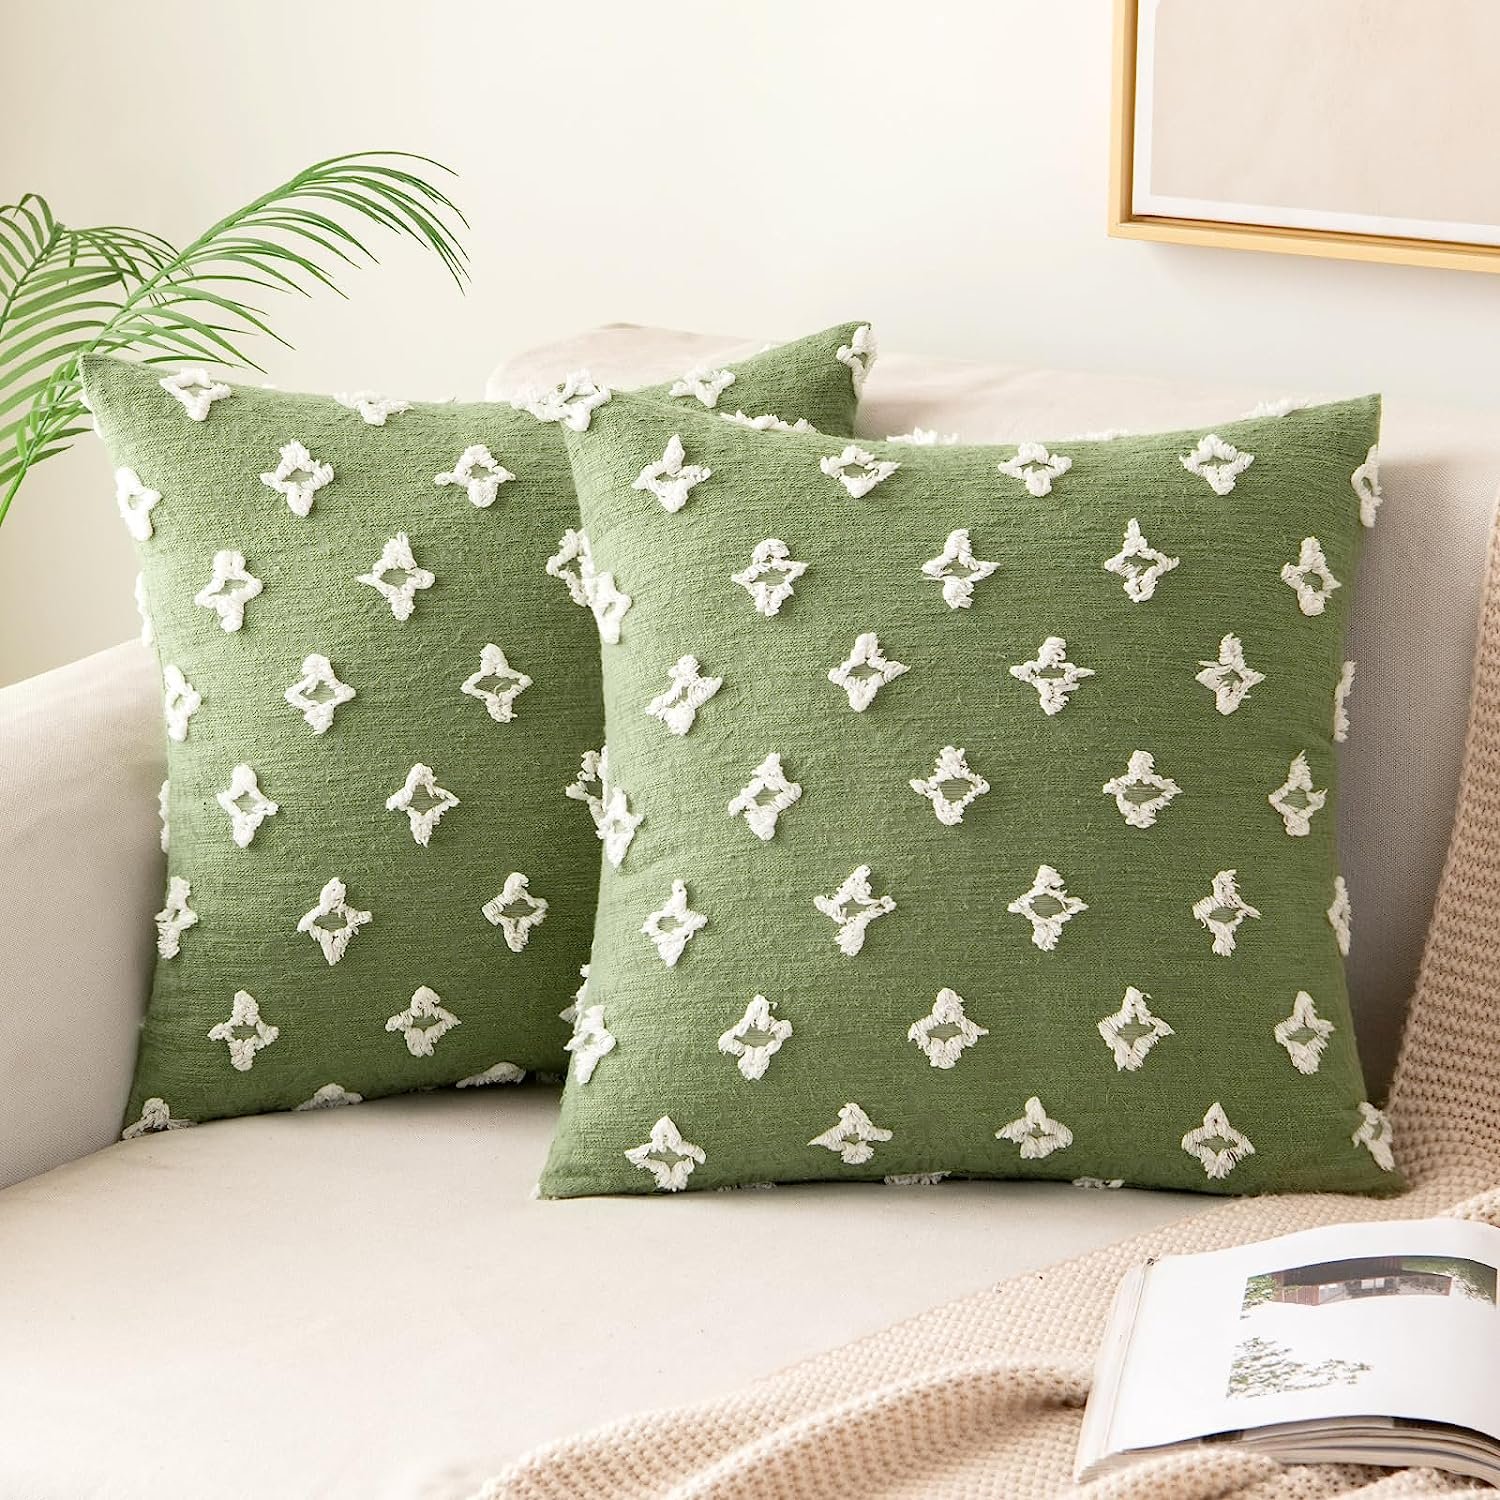 Set of 2 Sage Green Decorative Throw Pillow Covers - $17.99